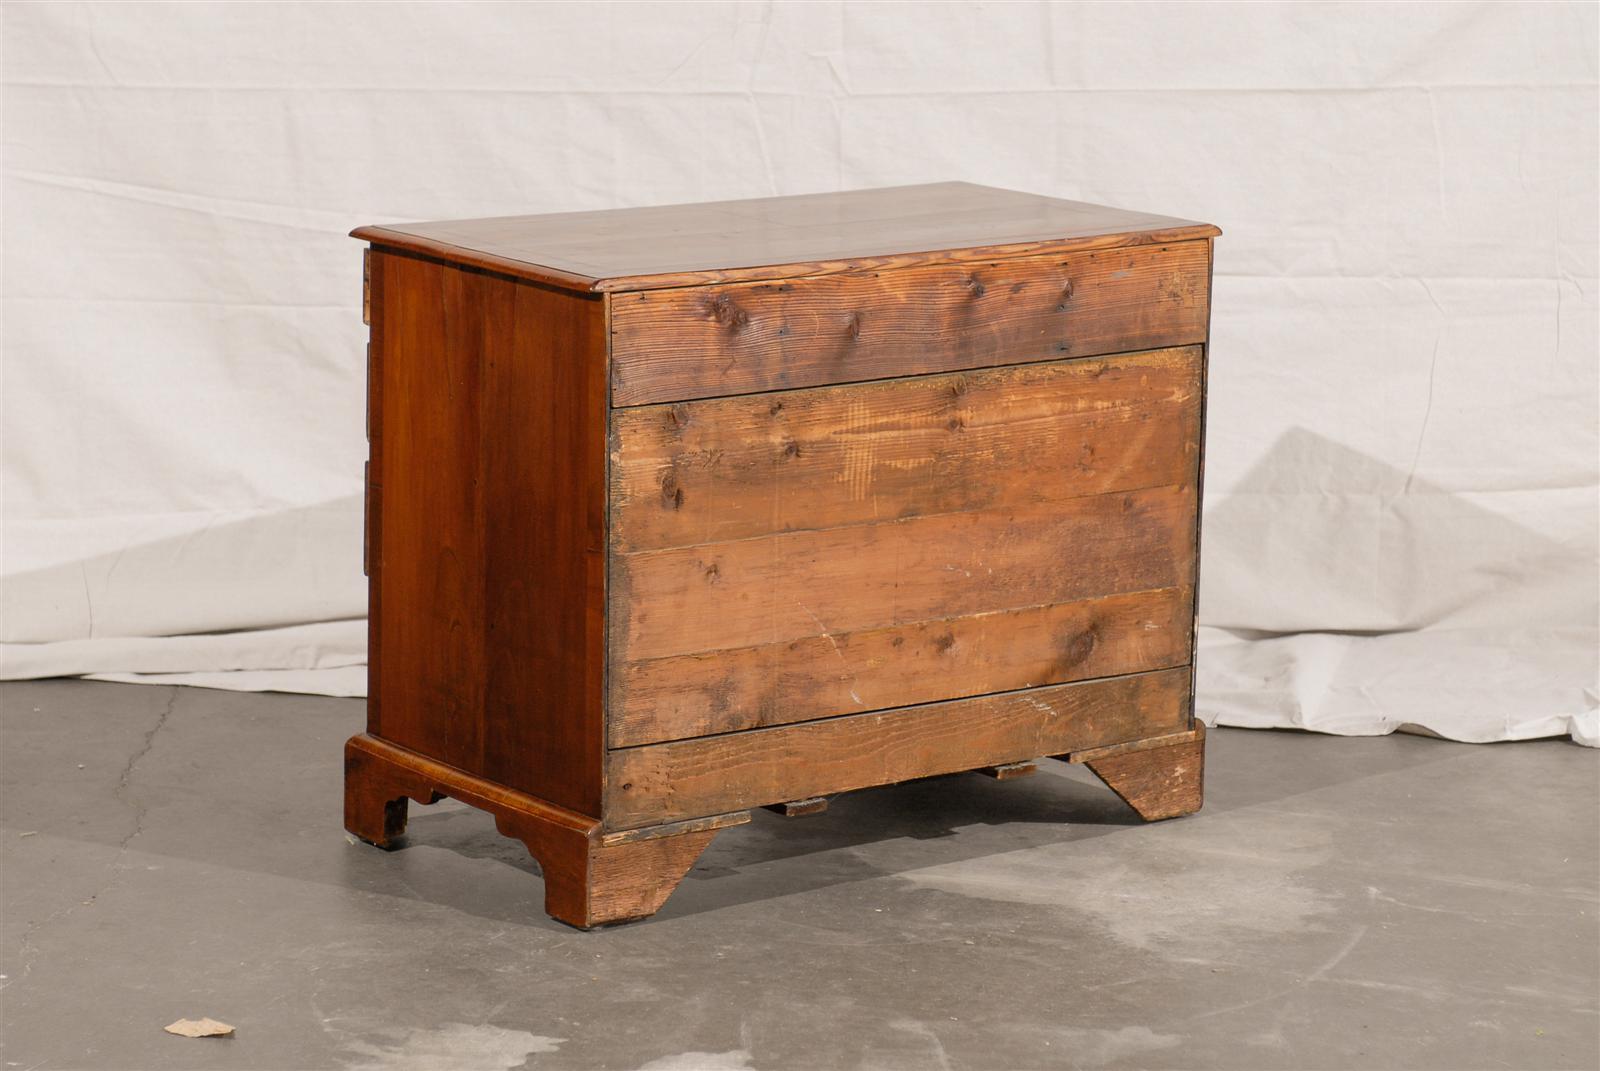 19th Century English Knee Hole Desk with Burled Walnut Top For Sale 6